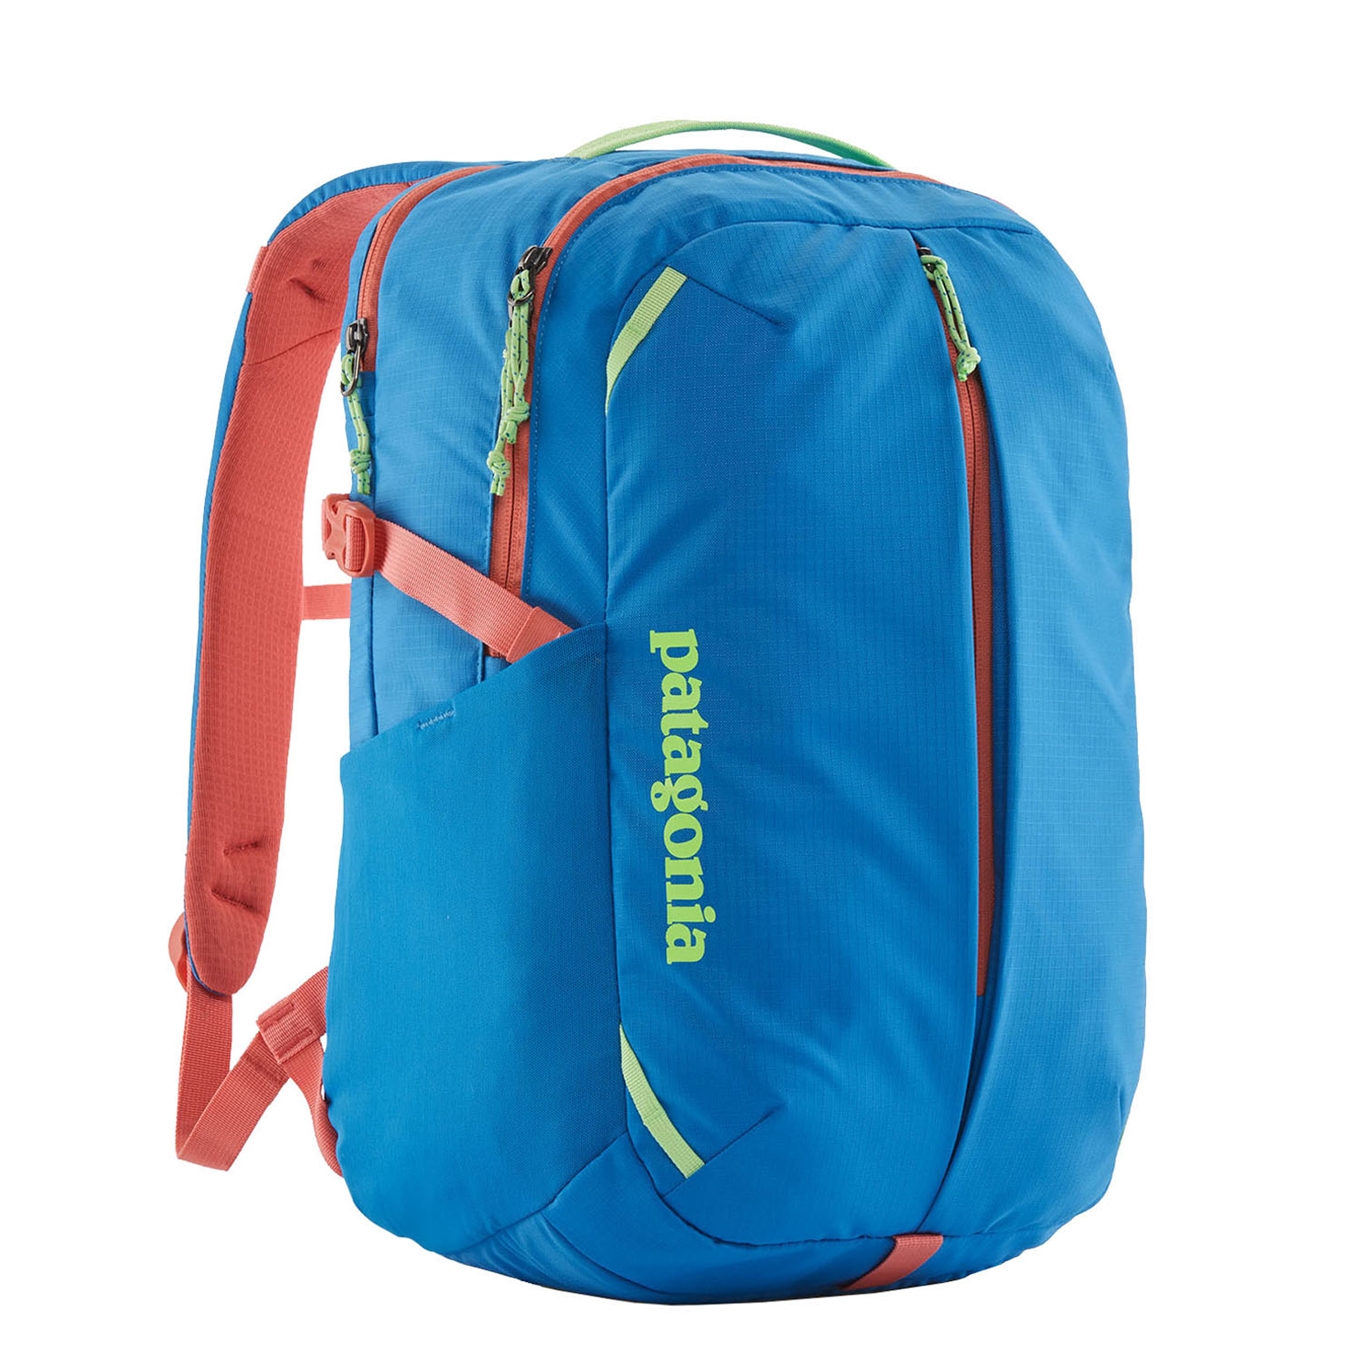 Patagonia Refugio Day Pack 26L vessel blue backpack